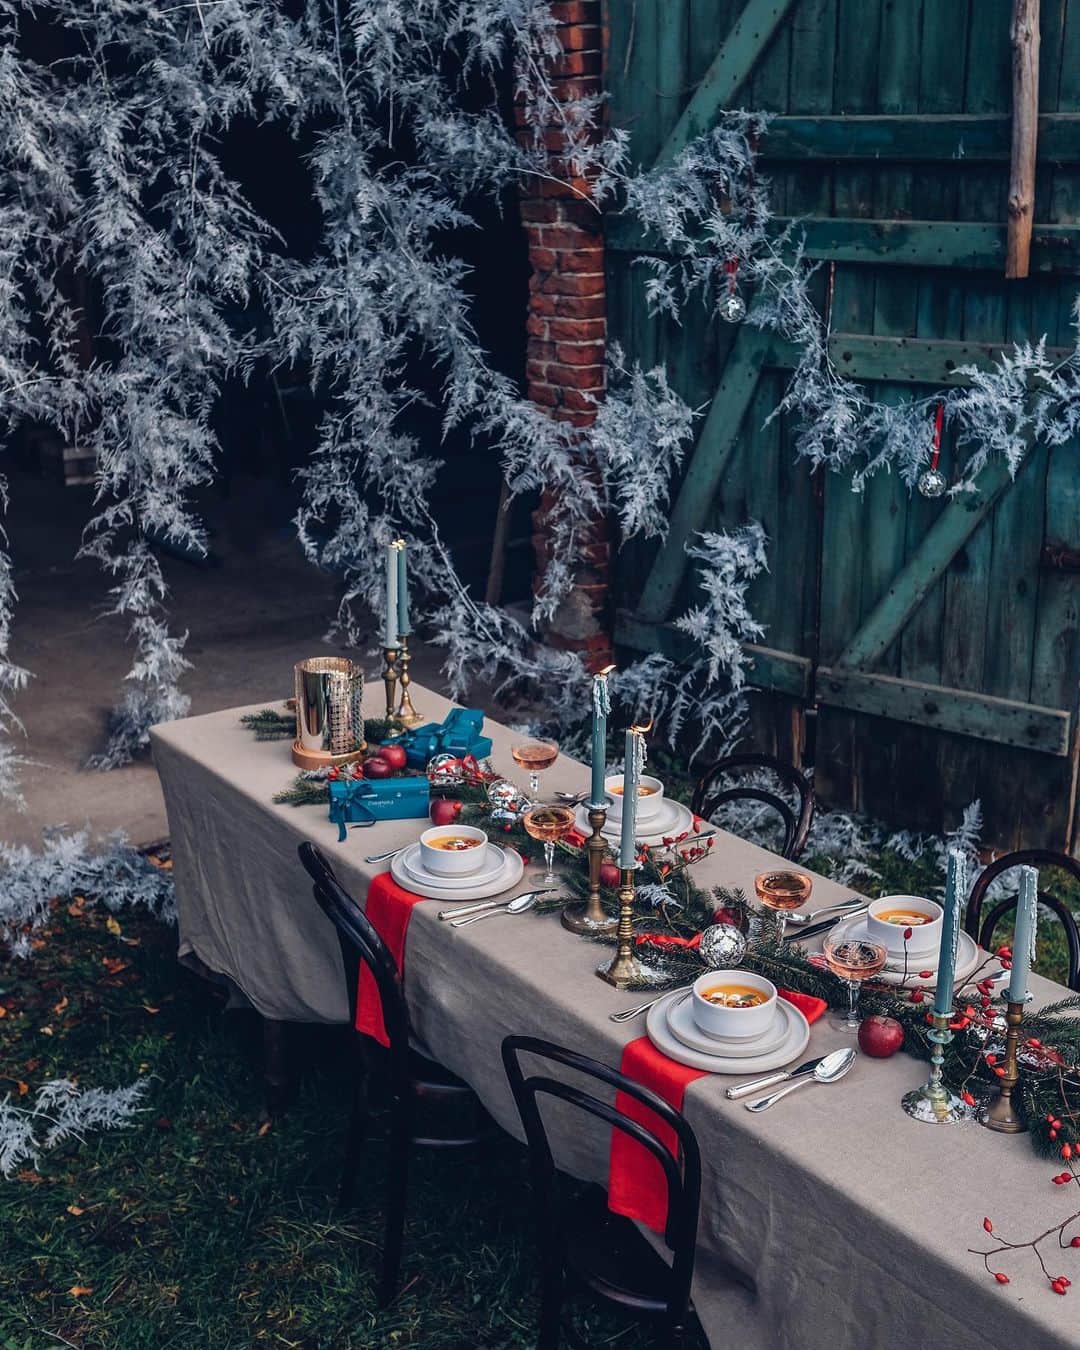 Our Food Storiesのインスタグラム：「Werbung|Advertisement We teamed up with @christofle to create a festive table with their beautiful Malmaison cutlery, their pretty Christmas balls and a beautiful candlelight🎄🌟 See more in our stories🤗 Happy Monday guys! #christofle  ____ #christofleparis #christoflesilver #silvercutlery #christmasdecor #christmasdecorations #christmasmood #tabledecor #tabledecoration #tablesetting #christmastable #fellowmag #foodstylist #foodphotographer #germanfoodblogger #flowerinstallation #momentslikethese #simplejoys」